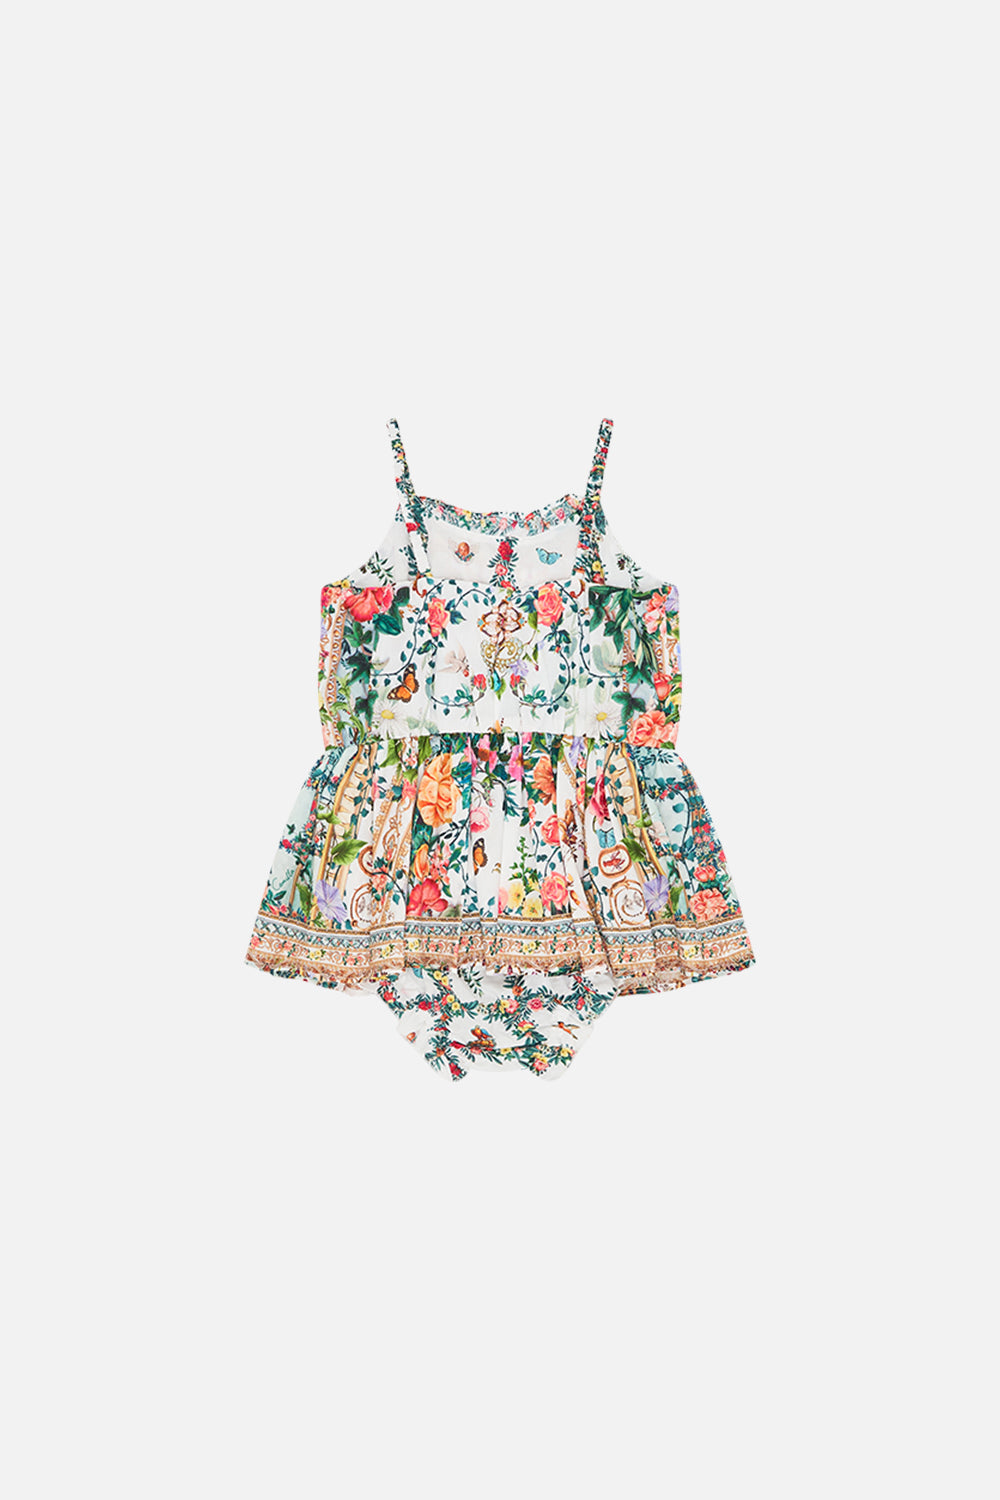 Back product view of Milla By CAMILLA babies floral jumpdress in Renaissance Romance print 